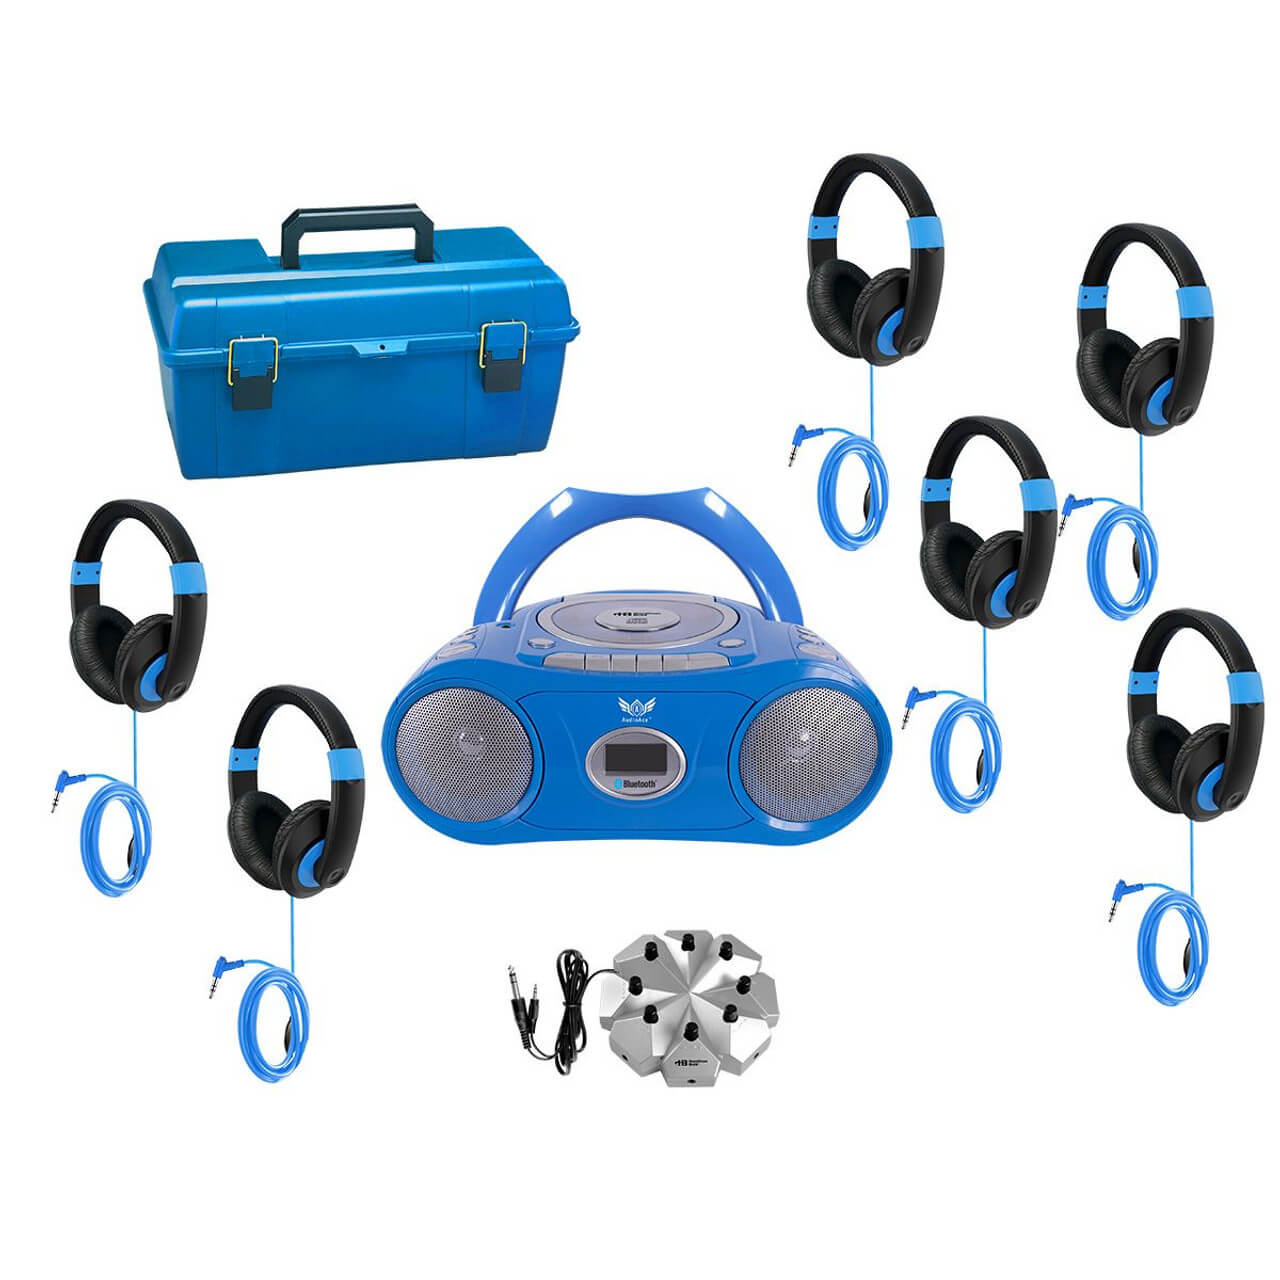 6-Station Listening Center with AudioAce Boombox, Jackbox and Smart-Trek Deluxe Headphones with Blue Accents